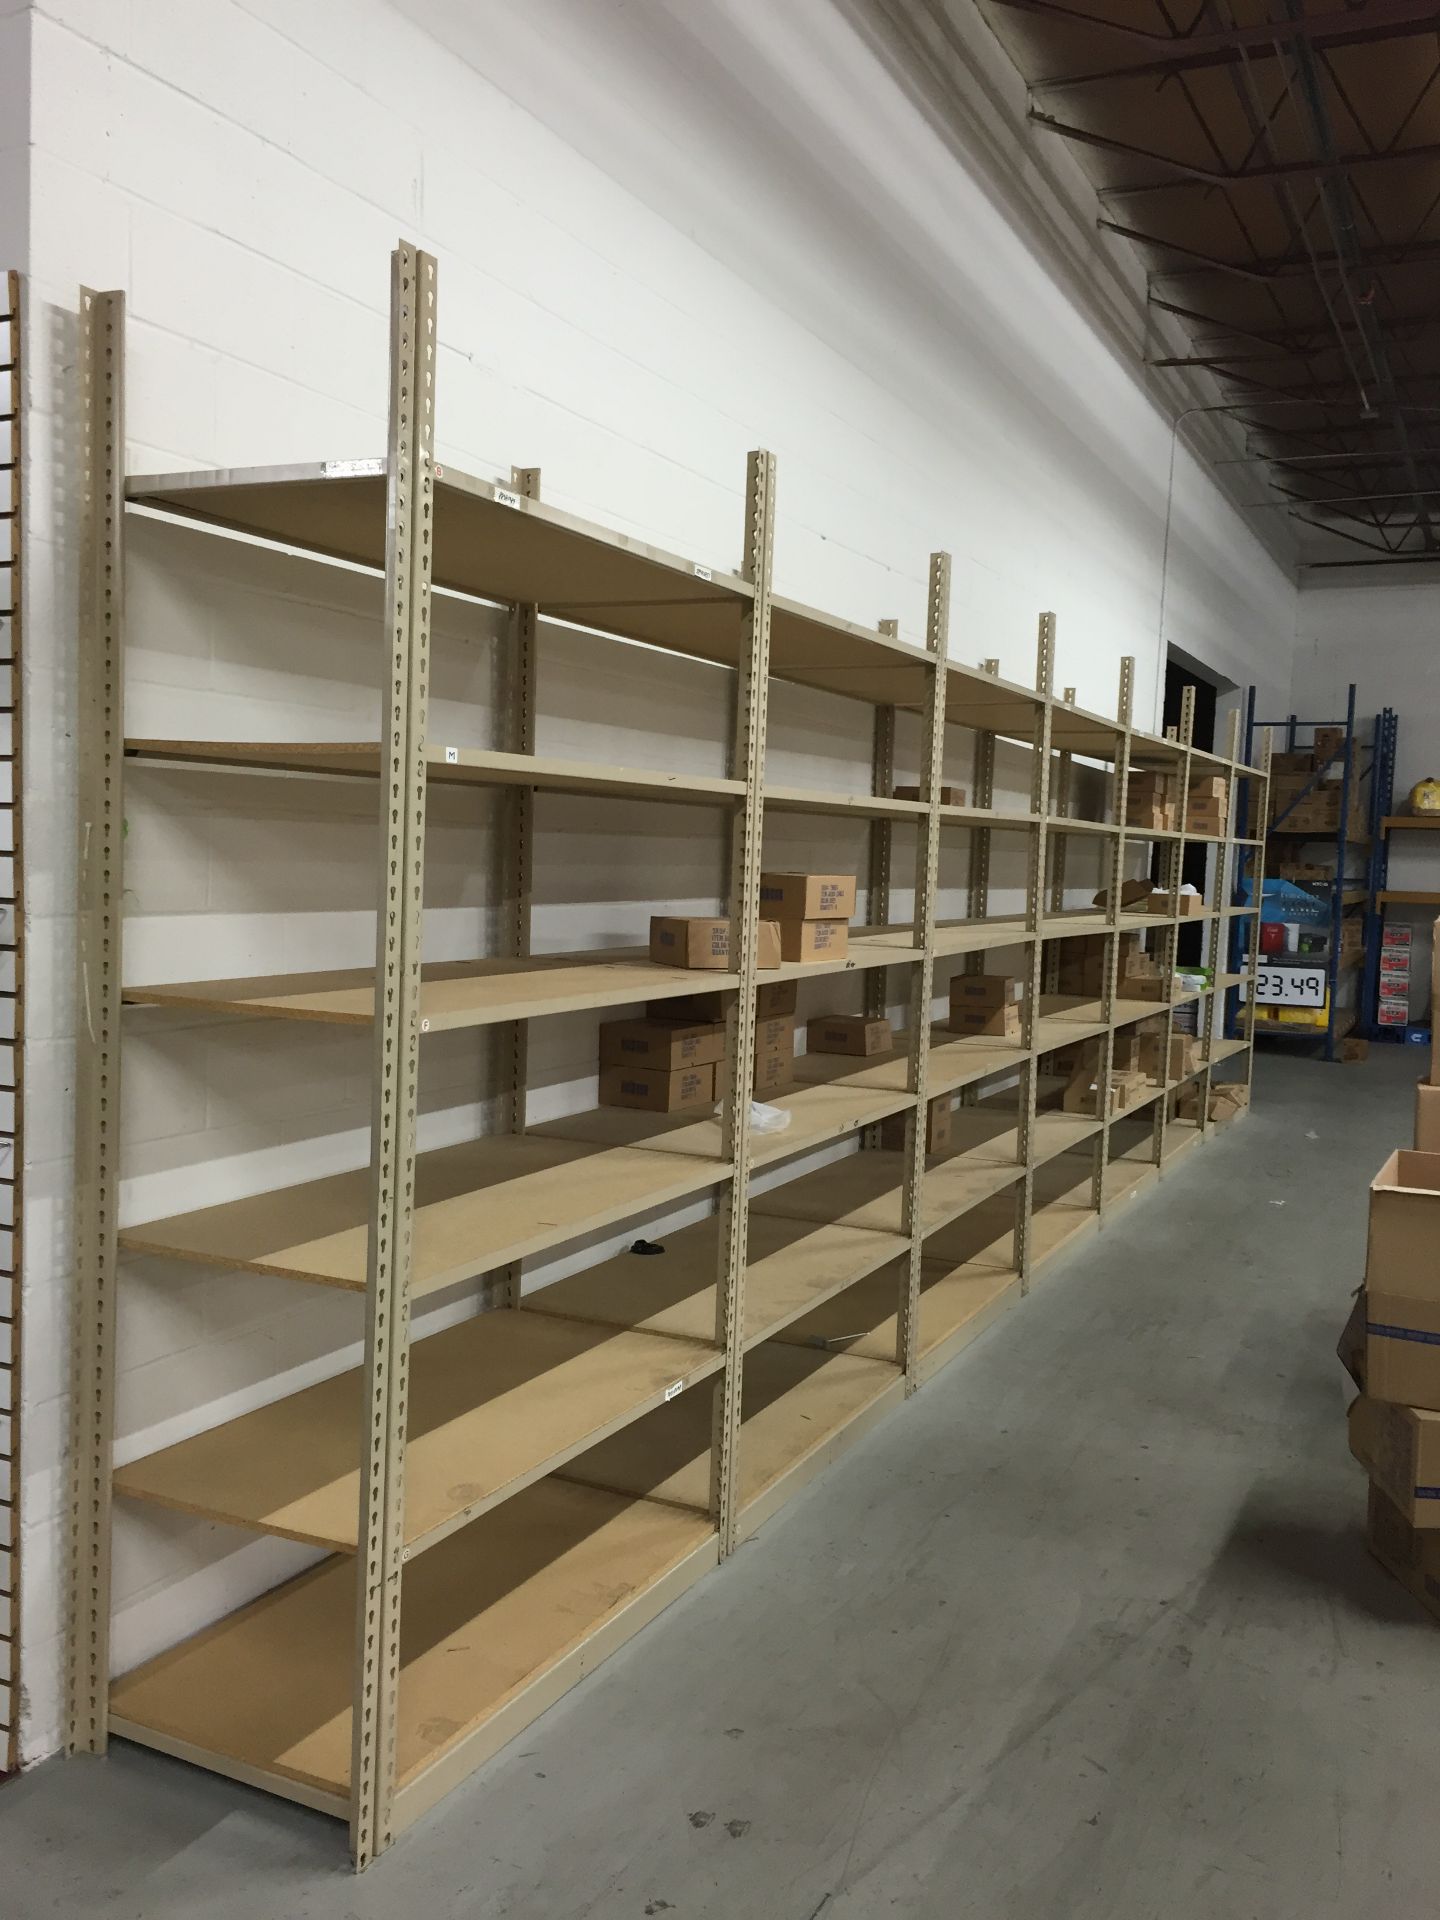 50 SECTIONS OF RIVETIER INDUSTRIAL SHELVING,  EACH SIZE 28"D X 65"W X 84"H, COLOR: MANILA, 5 SHELVES - Image 9 of 9